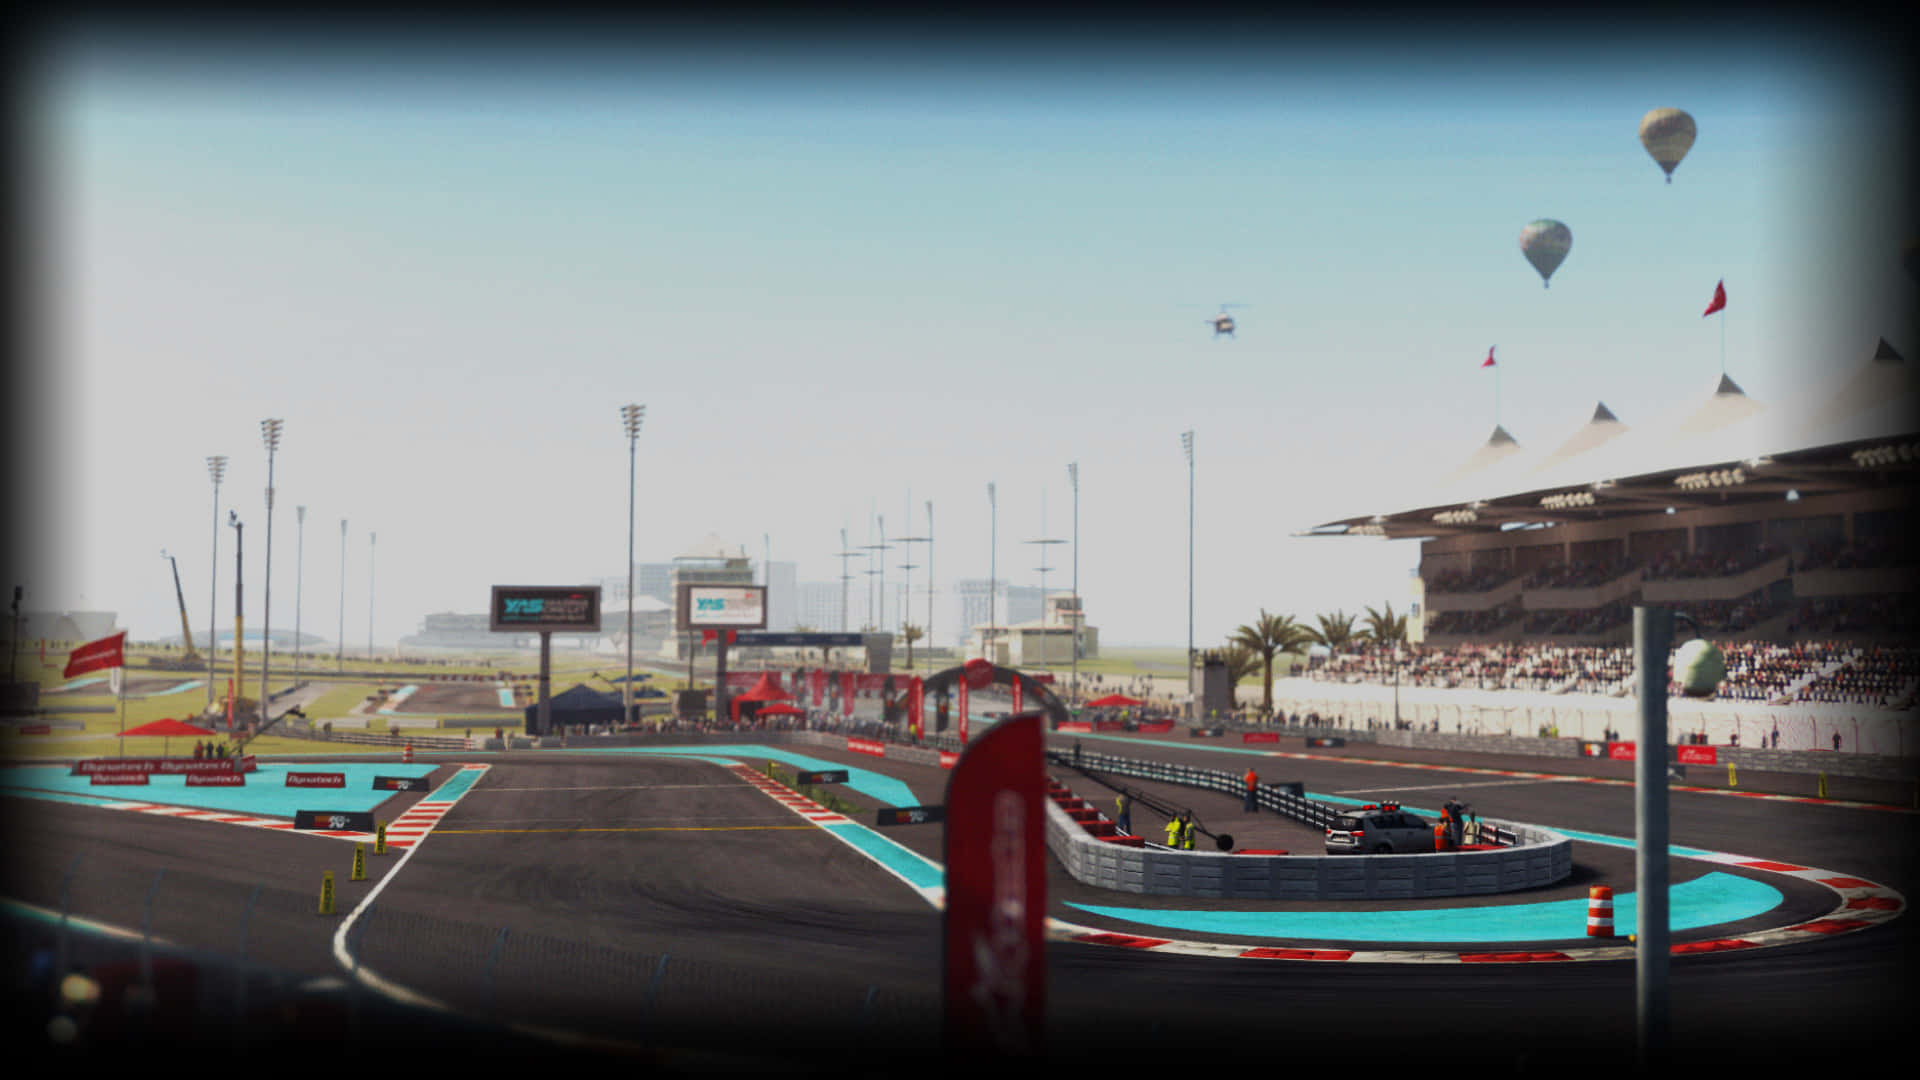 A Screenshot Of A Race Track With A Lot Of People